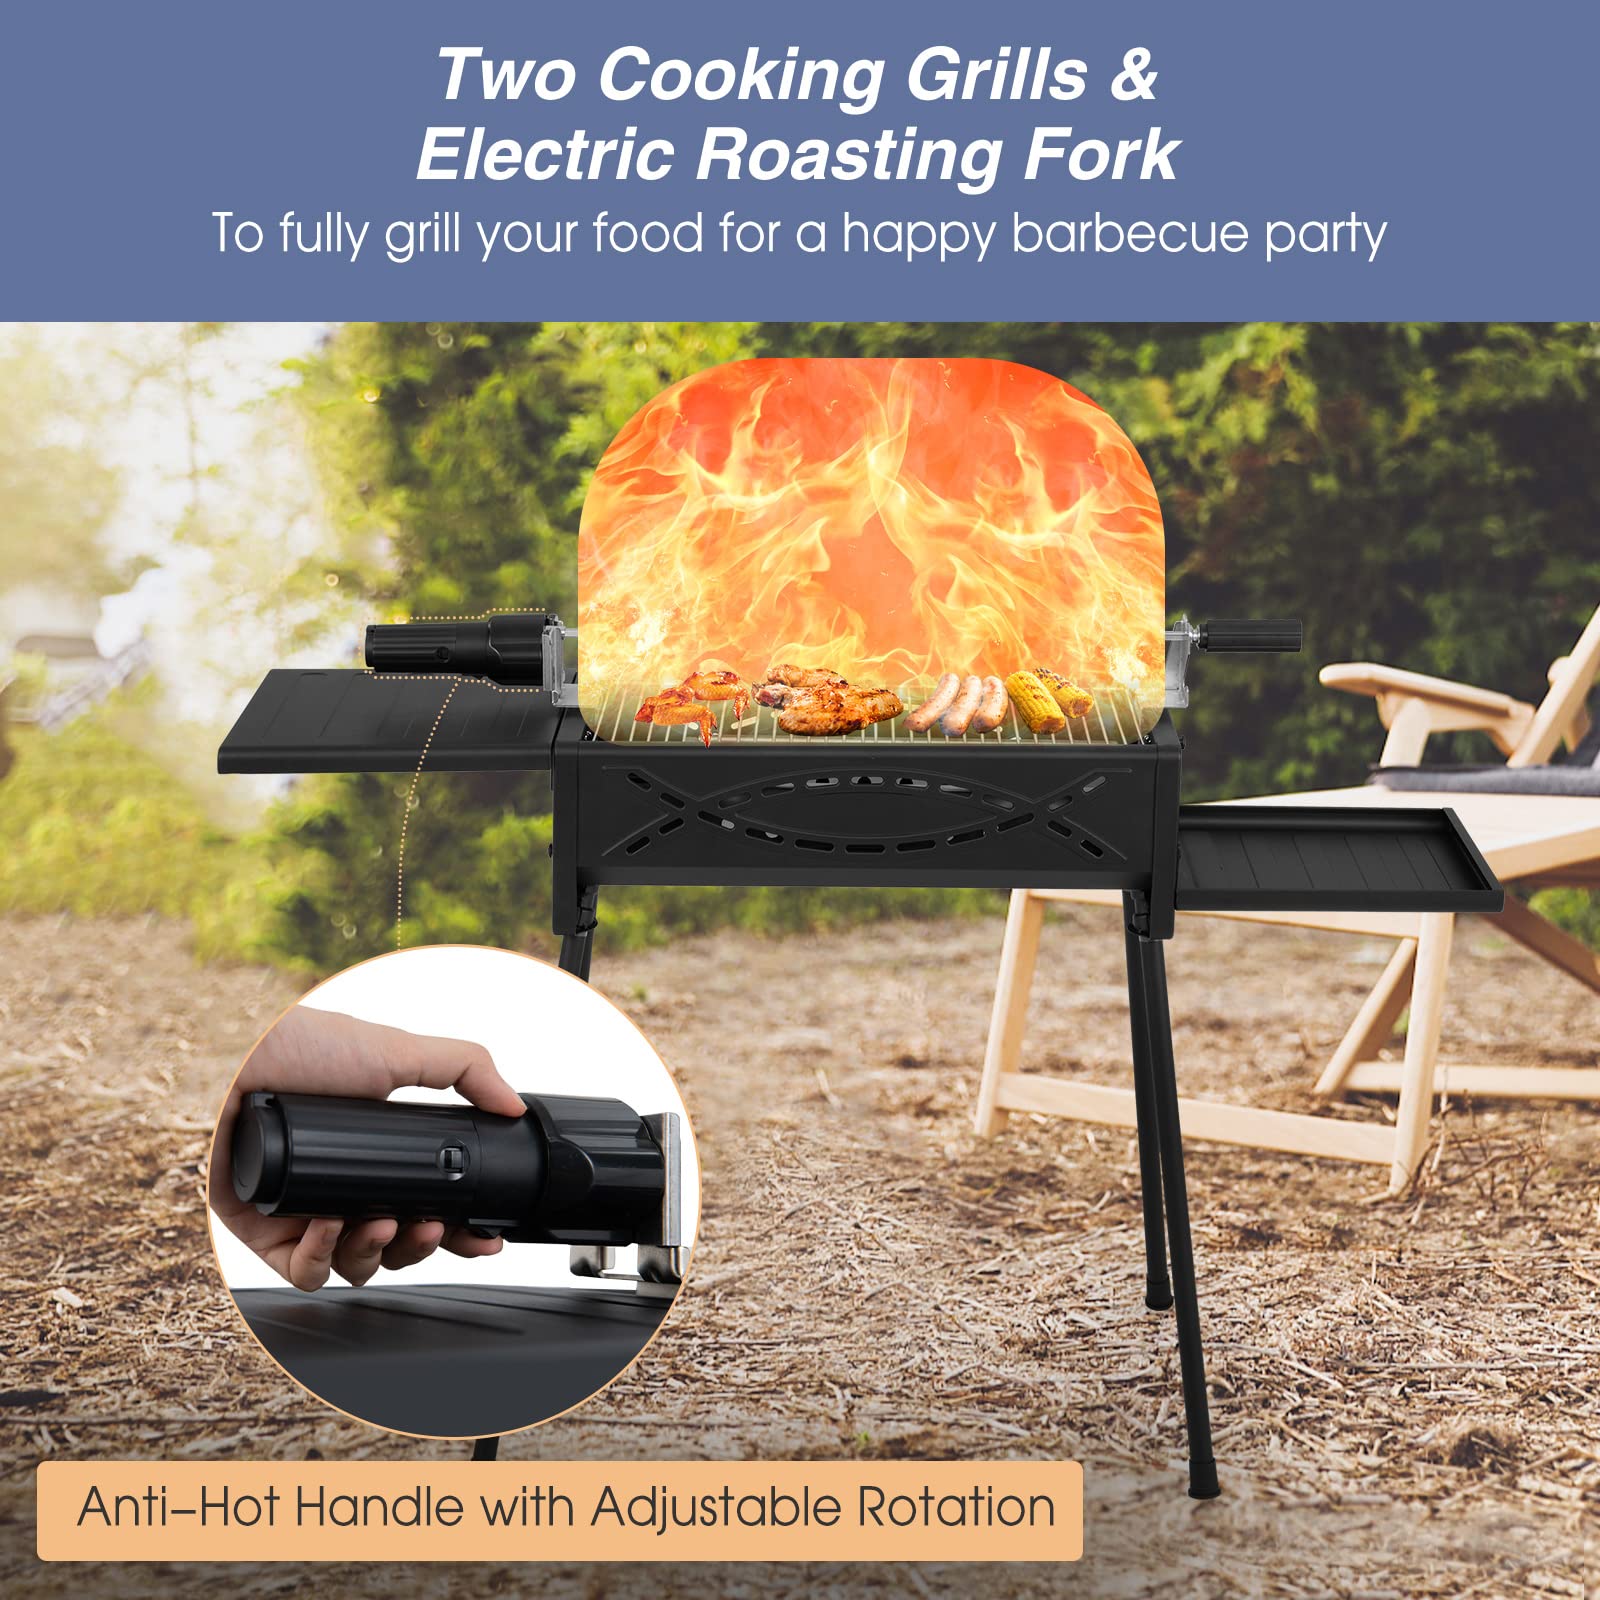 Giantex Charcoal Grill with Automatic Rotisserie Kit, 2 Folding Side Tables